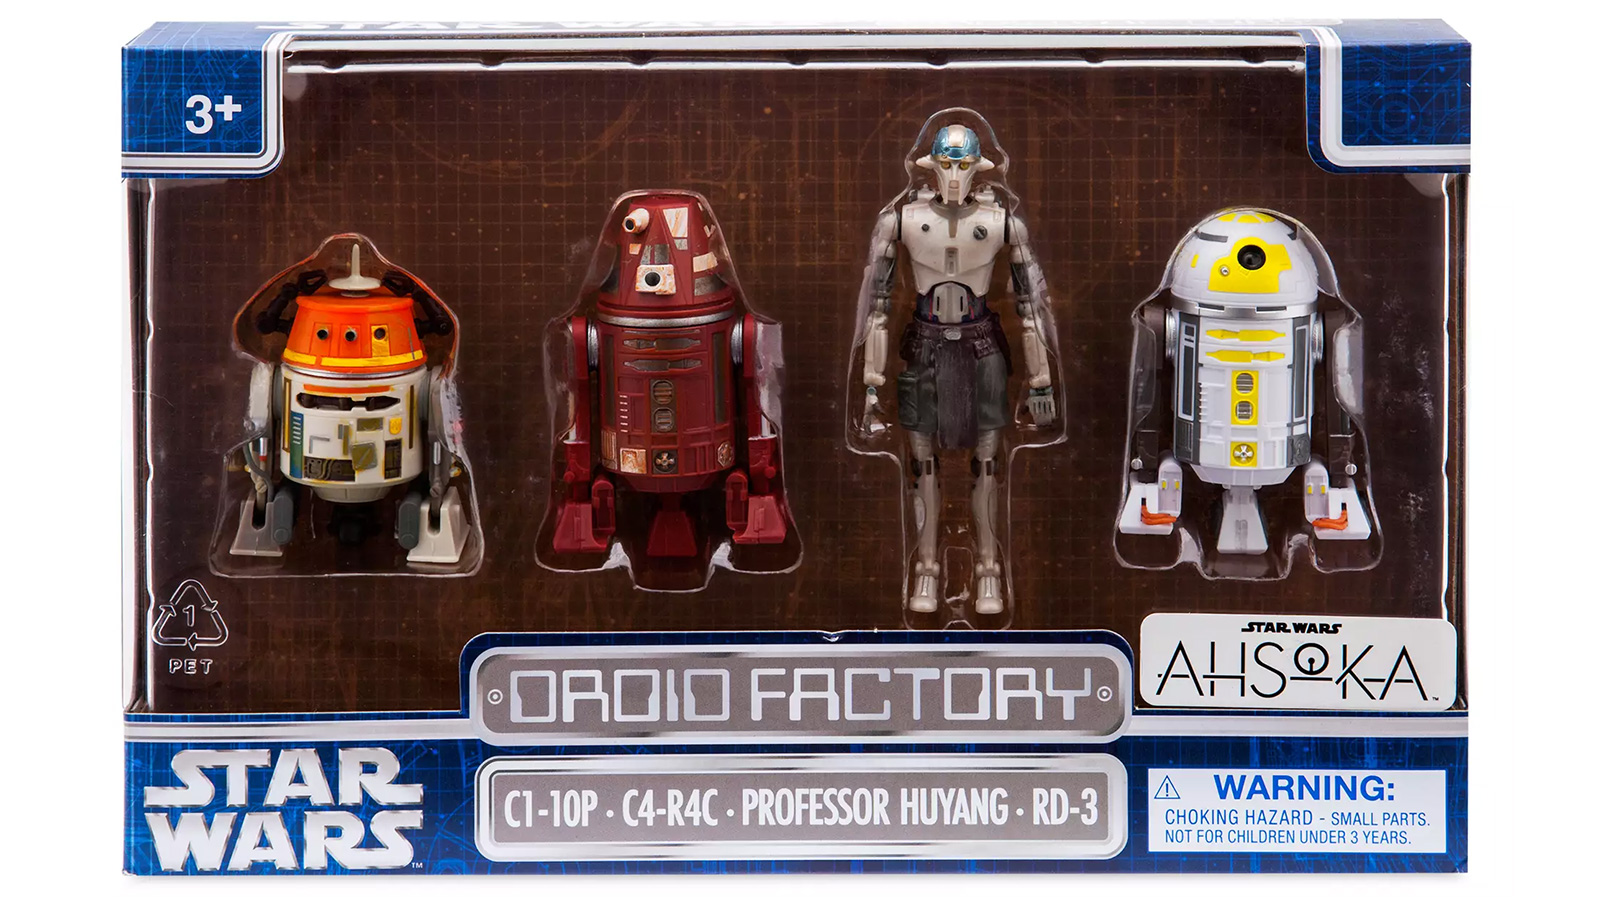 In Stock At Shop Disney - Exclusive Droid Factory Ahsoka Series Droid Set